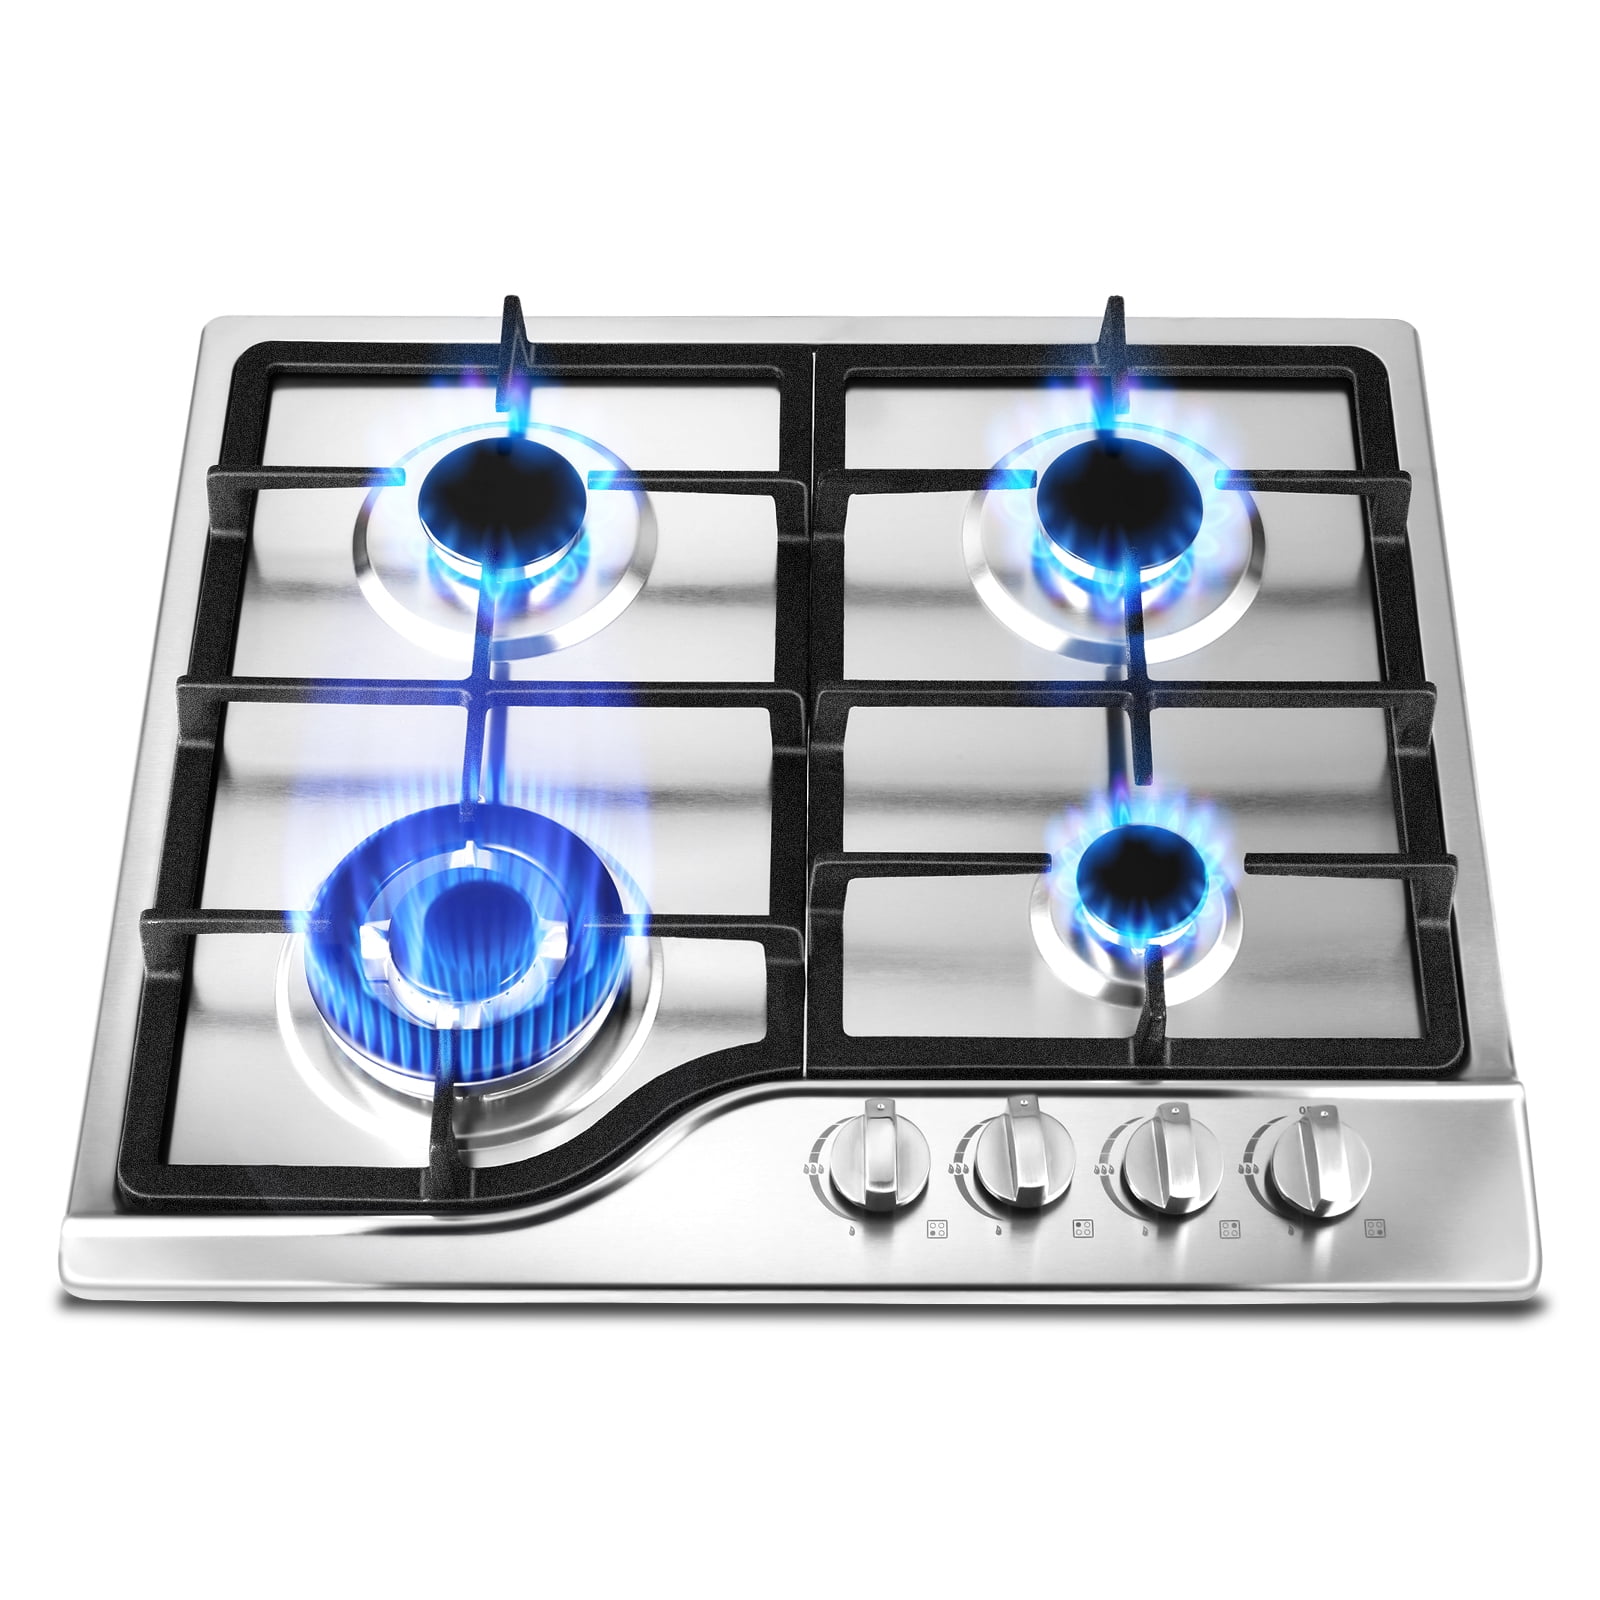 Details about   4 Burners Stainless Steel Stove Built in Gas Cooktop 22″x20″ with NG/LPG Convers 